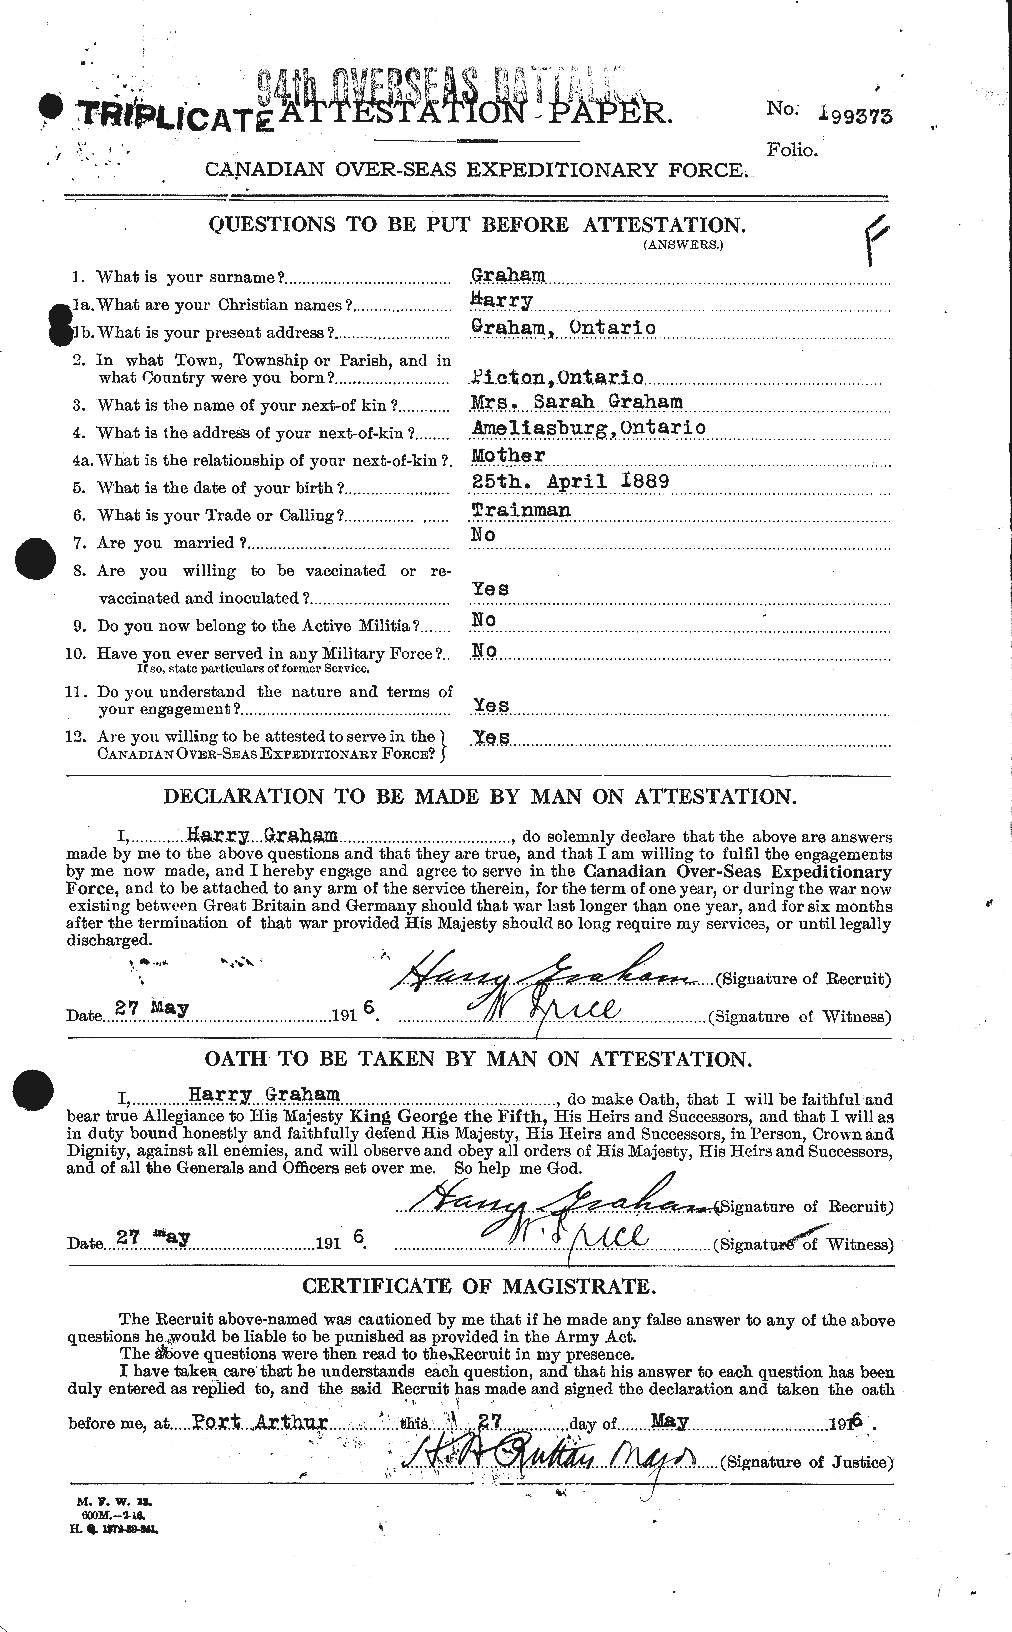 Personnel Records of the First World War - CEF 357714a